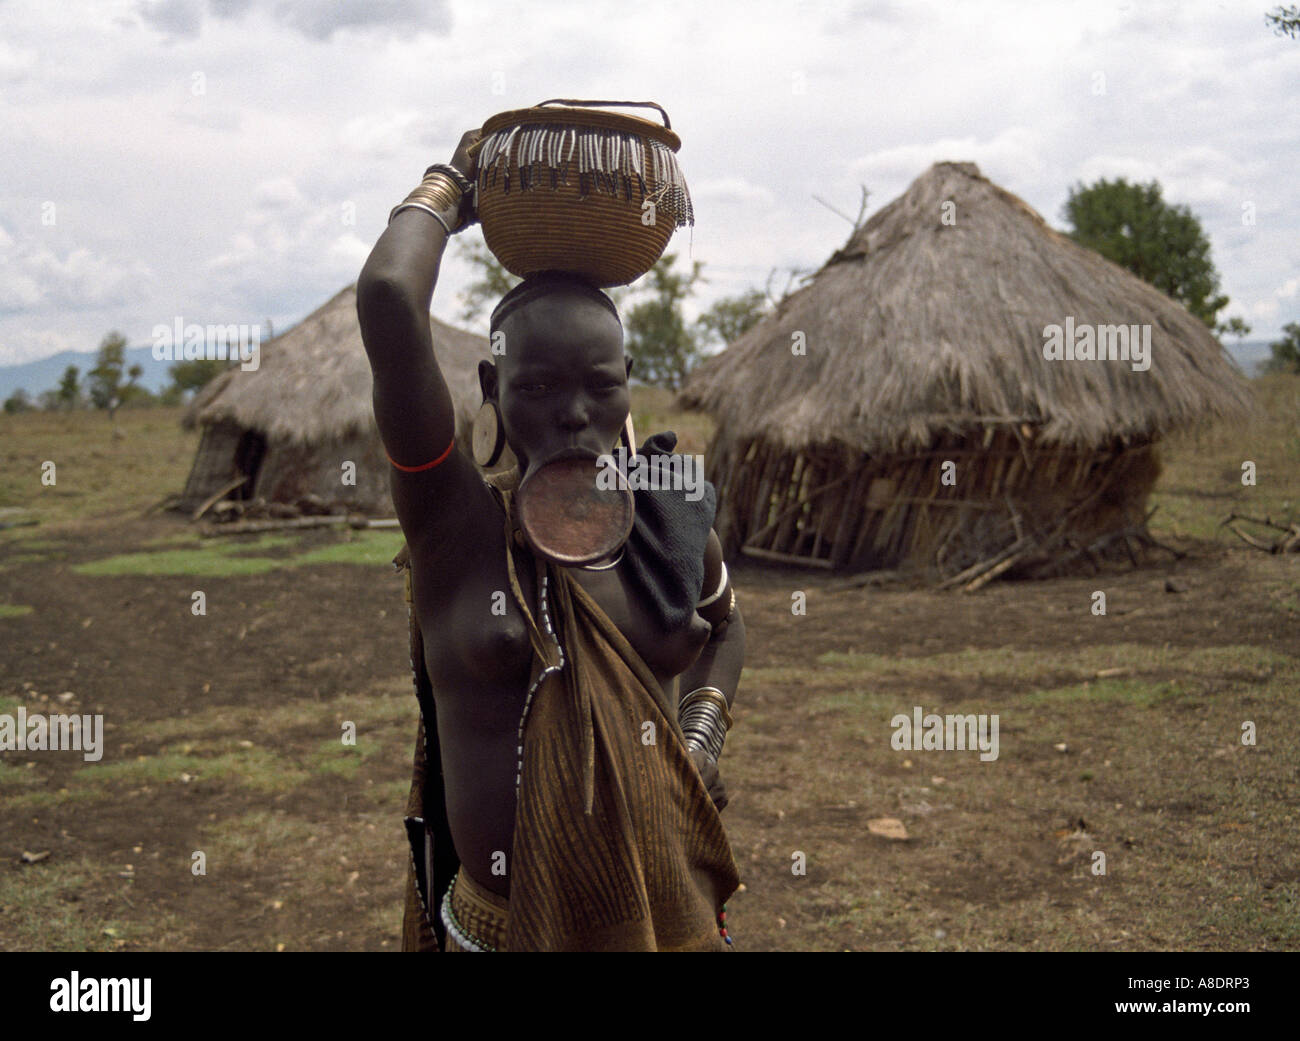 Mursi tribe woman with lip plate and basket on her head Ethiopia Stock Photo